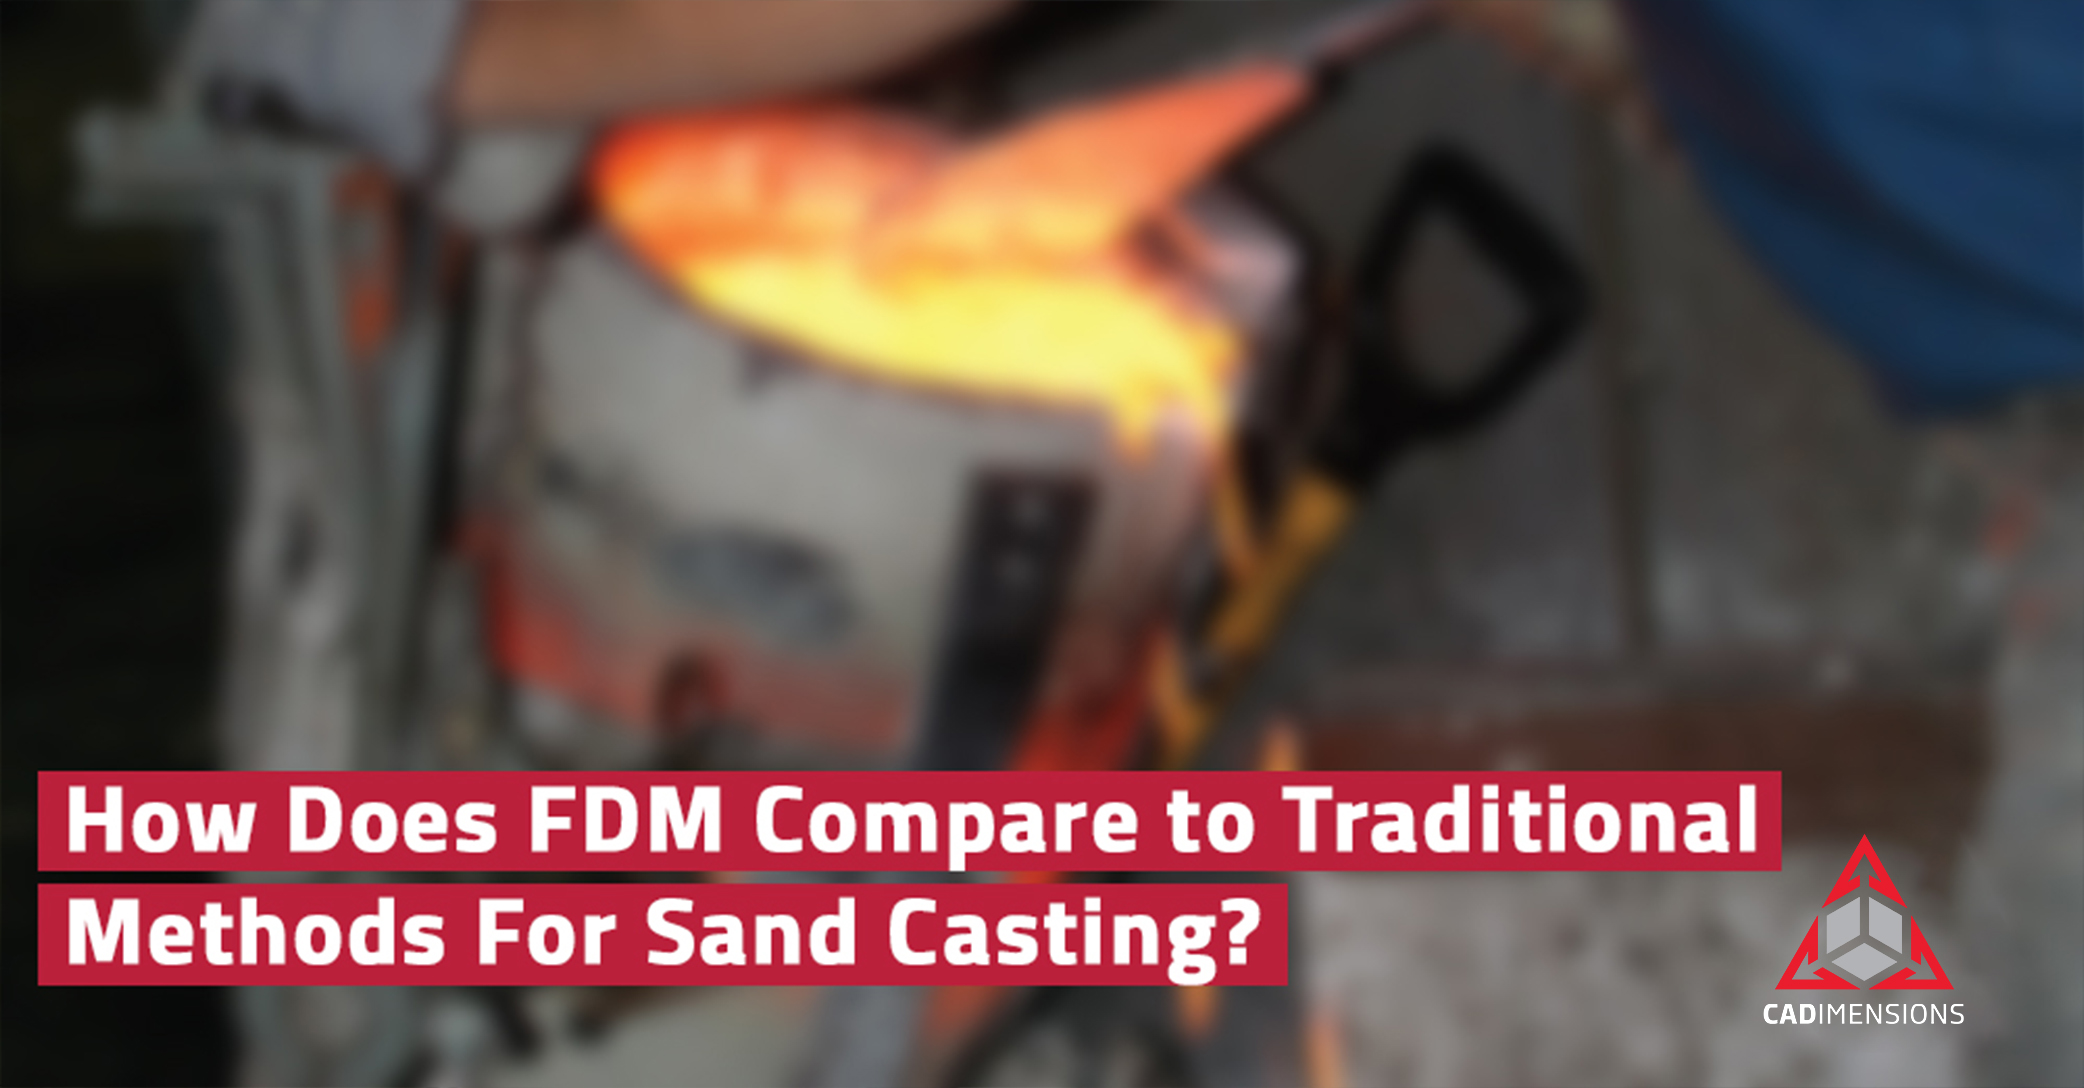 Sand Casting with FDM Technology